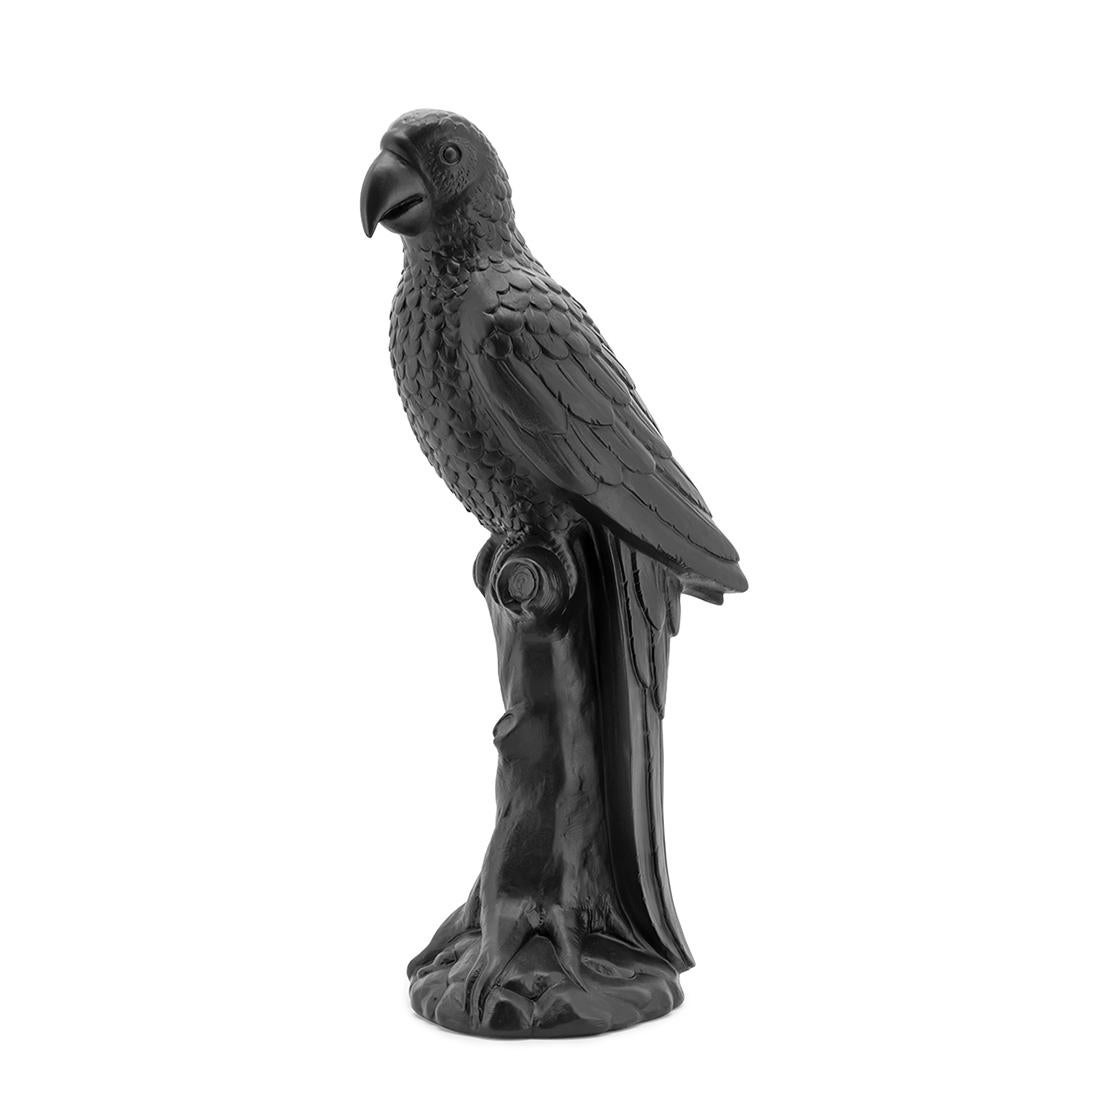 Sculpture black parrot in ceramic 
in black finish.
Also available in white finish.